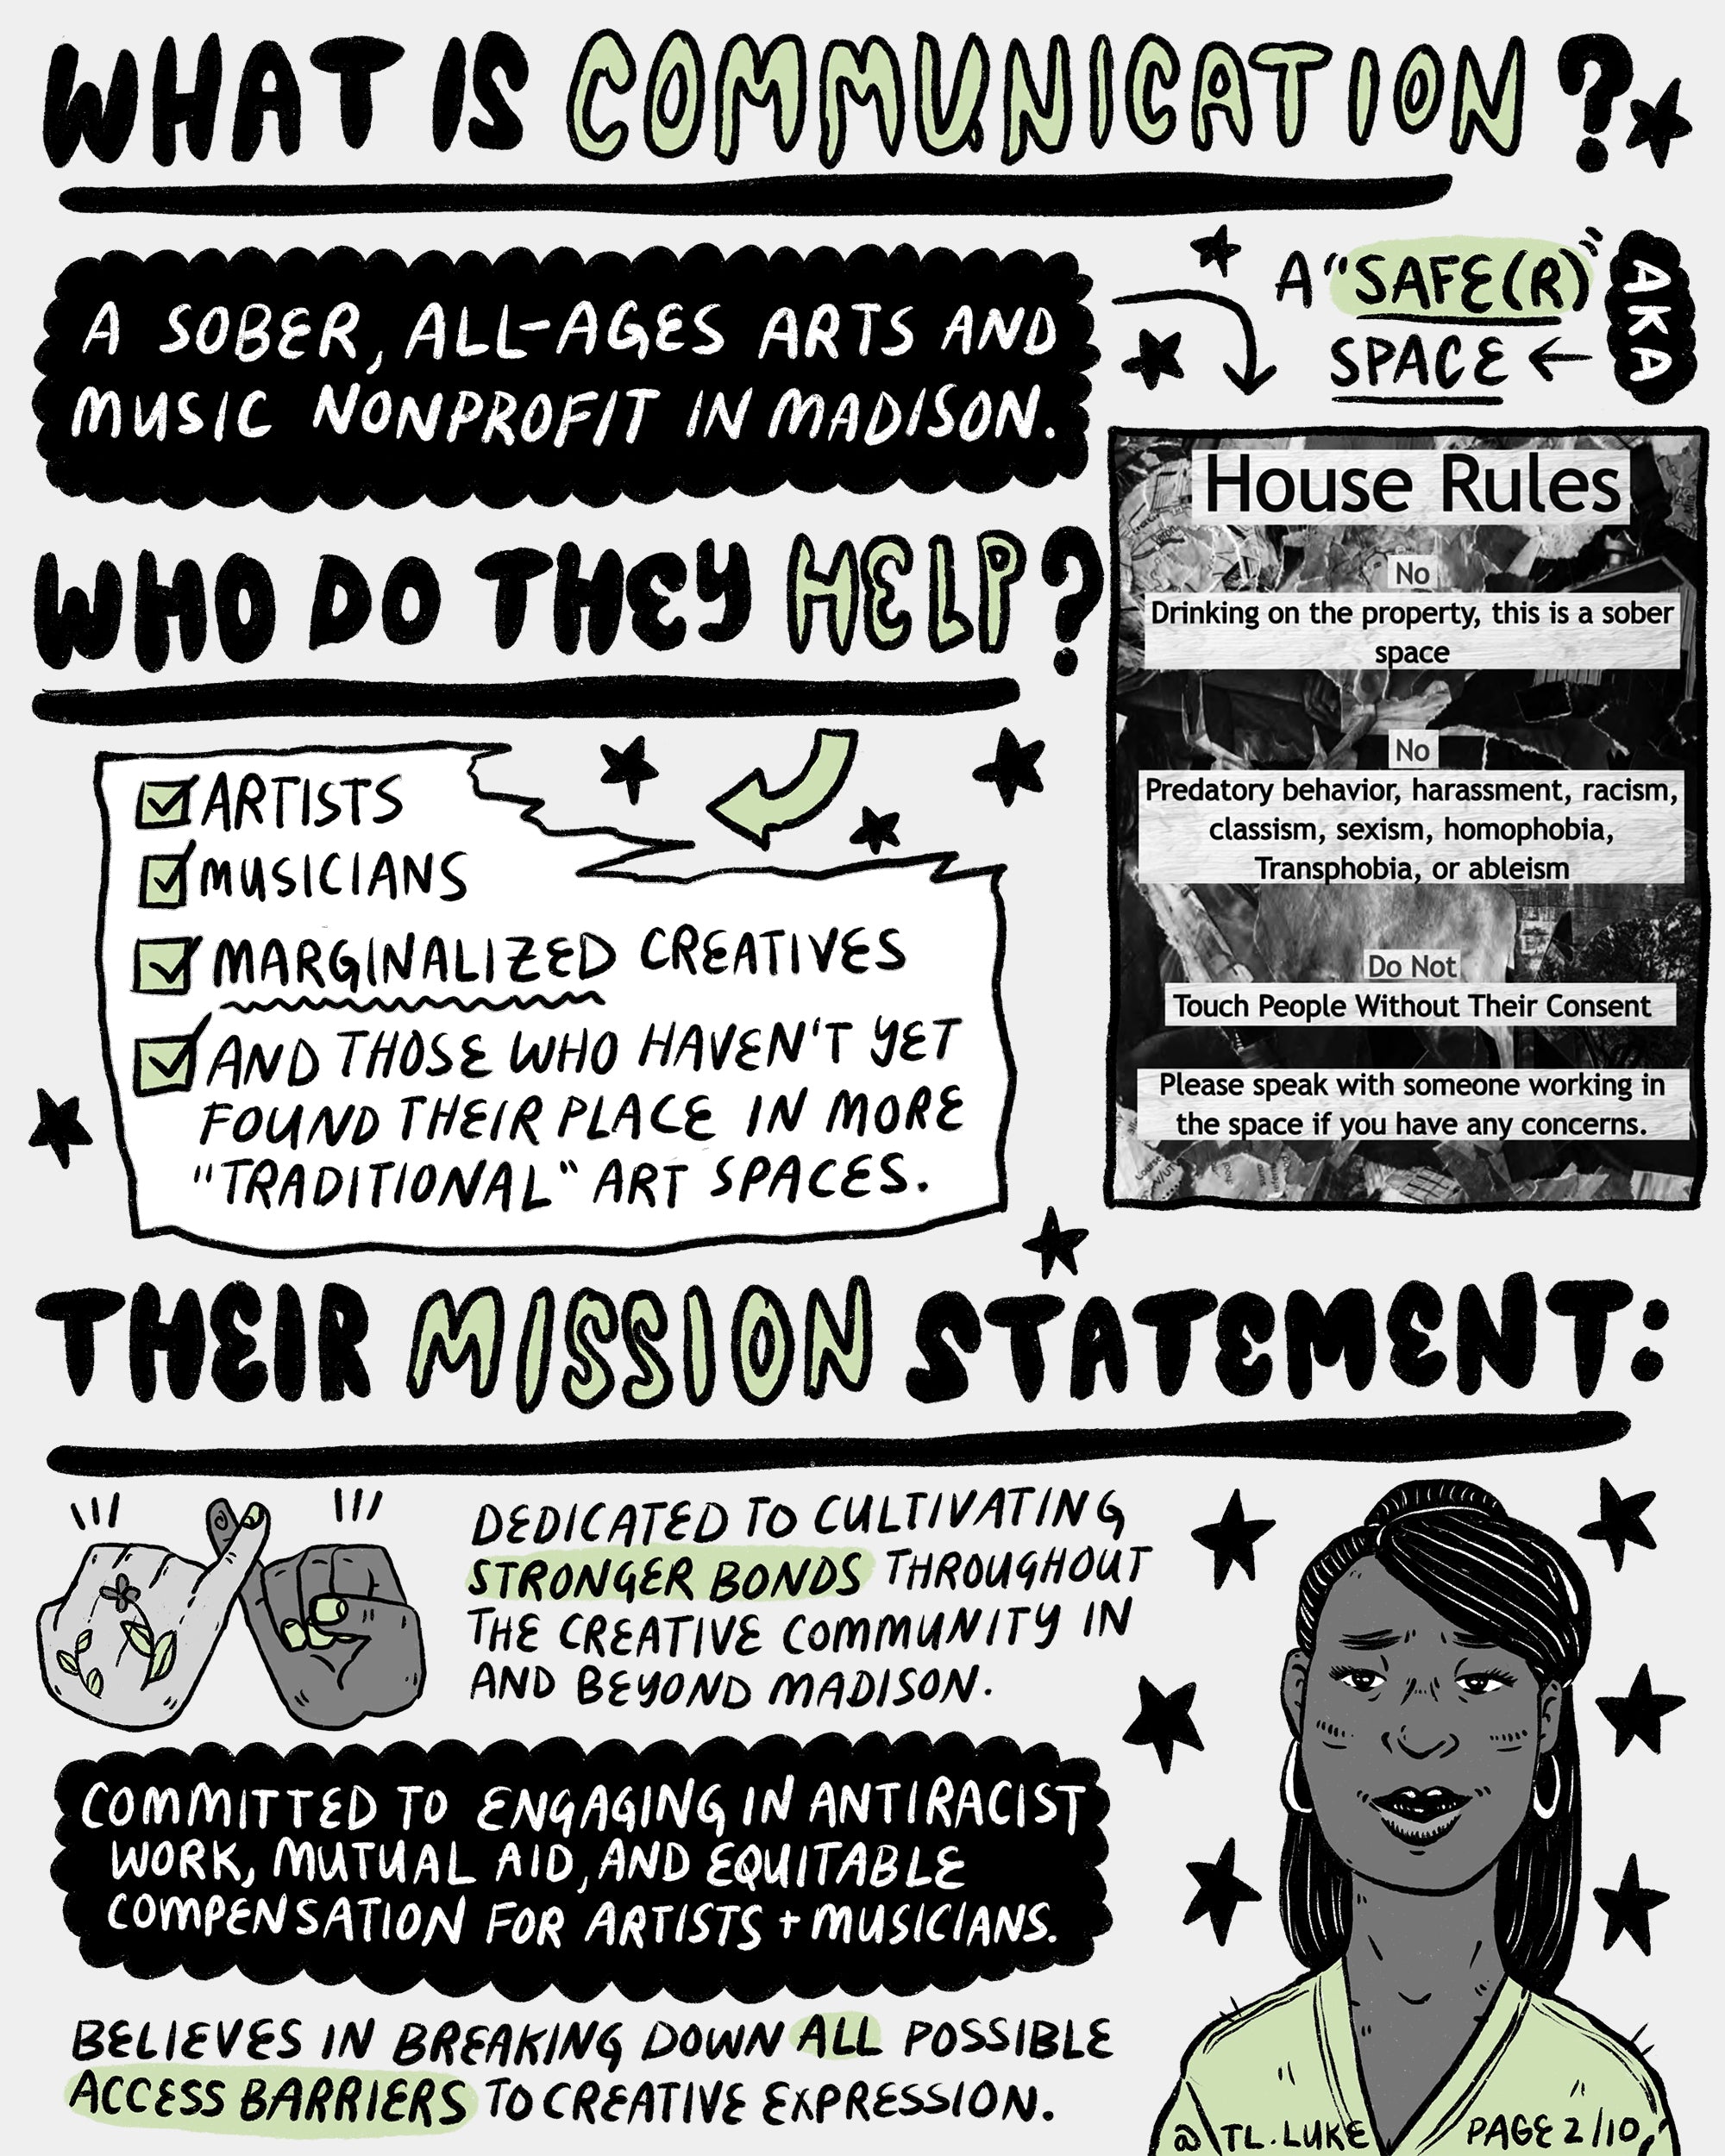 Page 2 of Auntie Luke’s Guide to Wisconsin’s Art Economy, Part 2 introduces Communication.